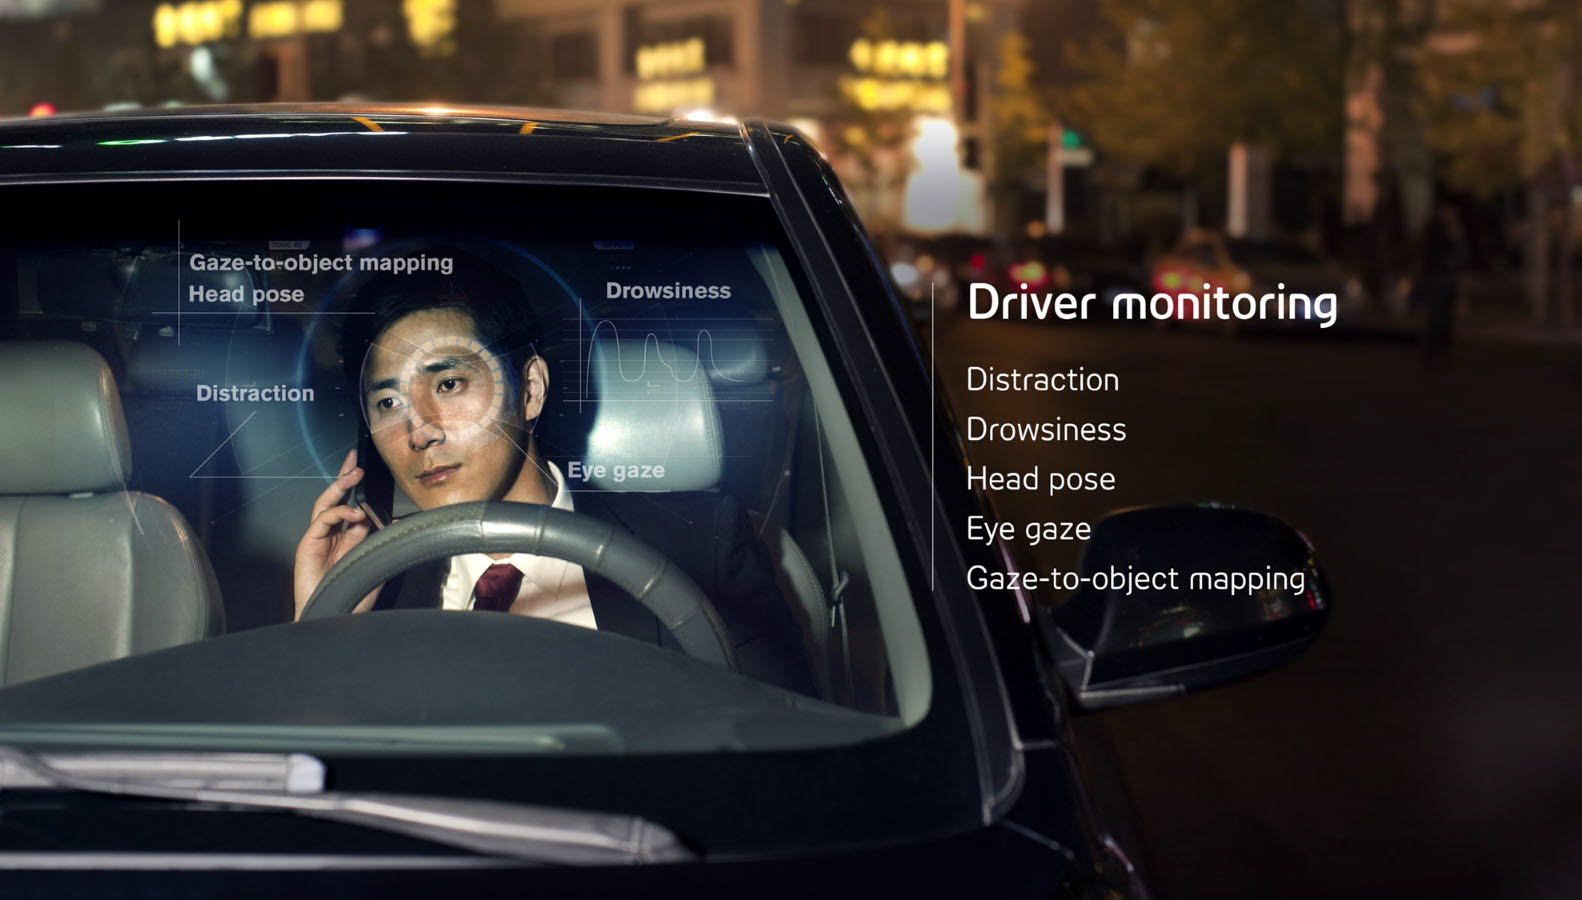 Tobii Driver monitoring system